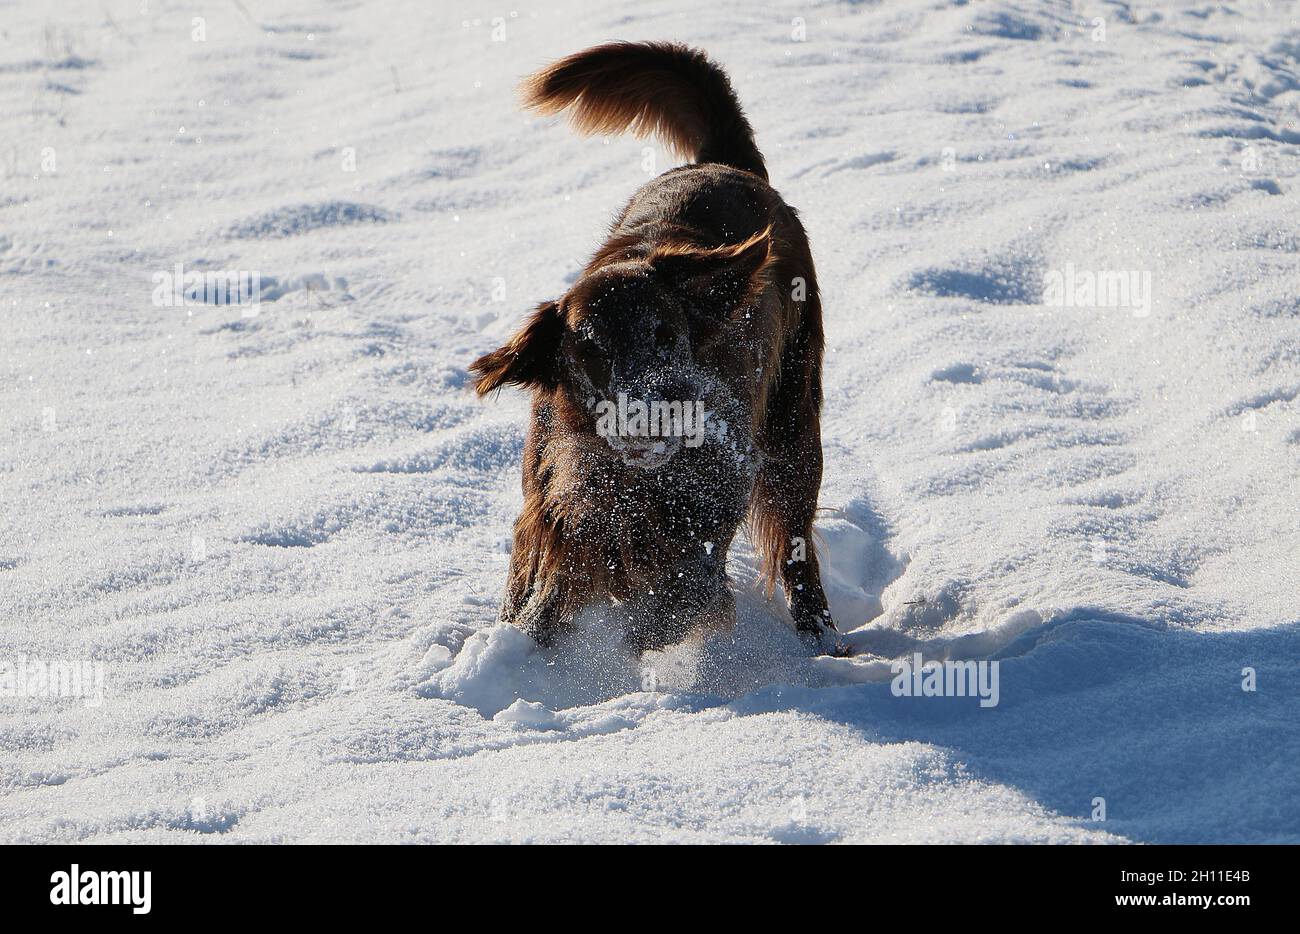 Portrait of a brown dog running in the snow. Stock Photo